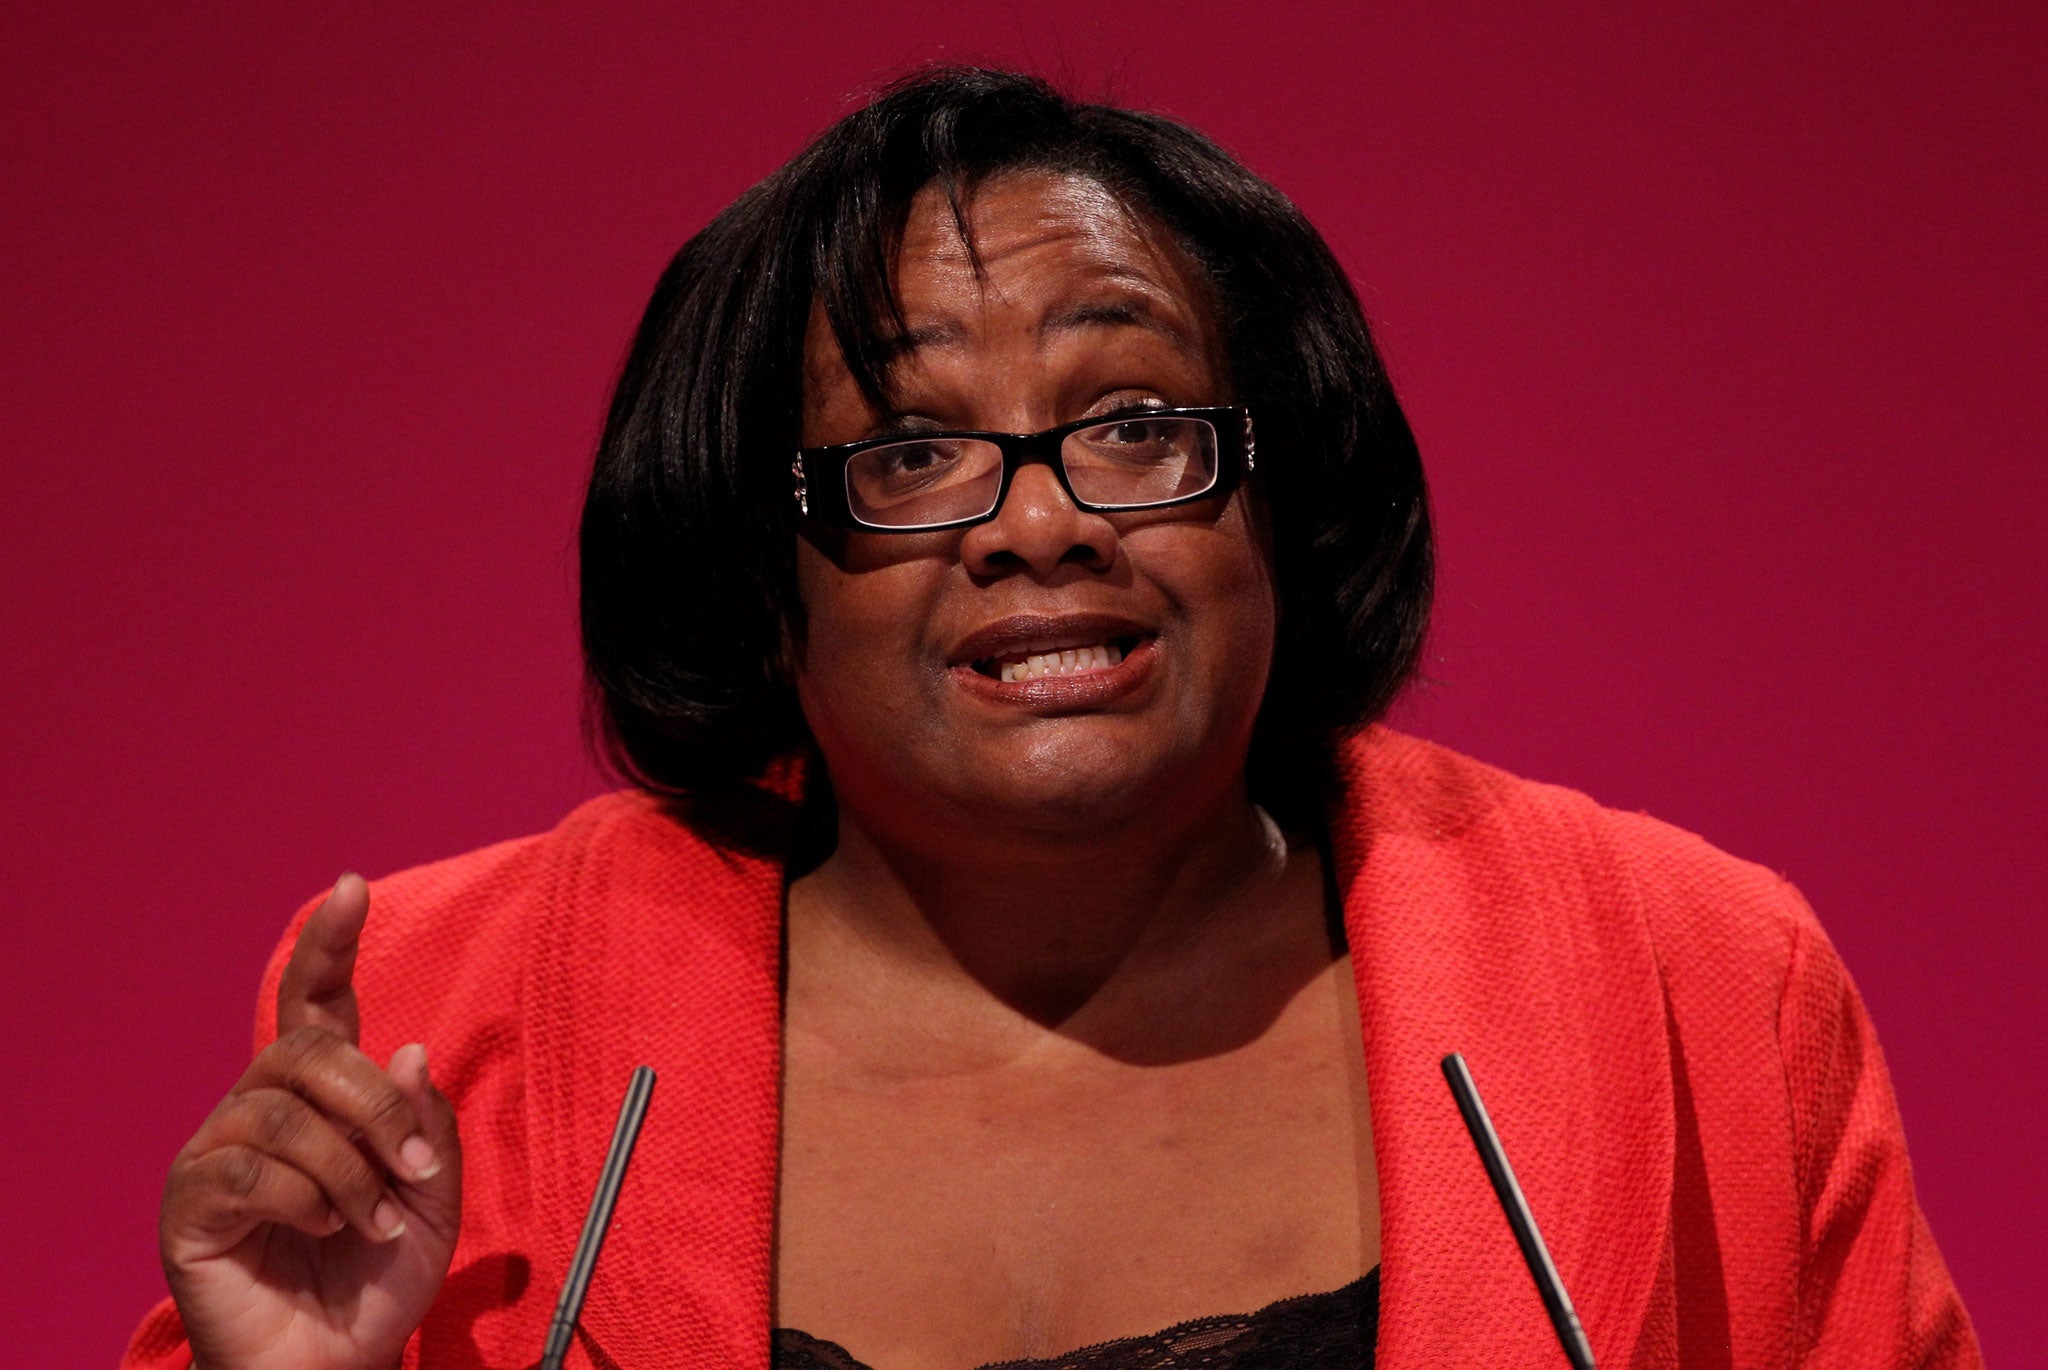 MP Diane Abbott claimed last year that there was a 'crisis of masculinity' in Britain